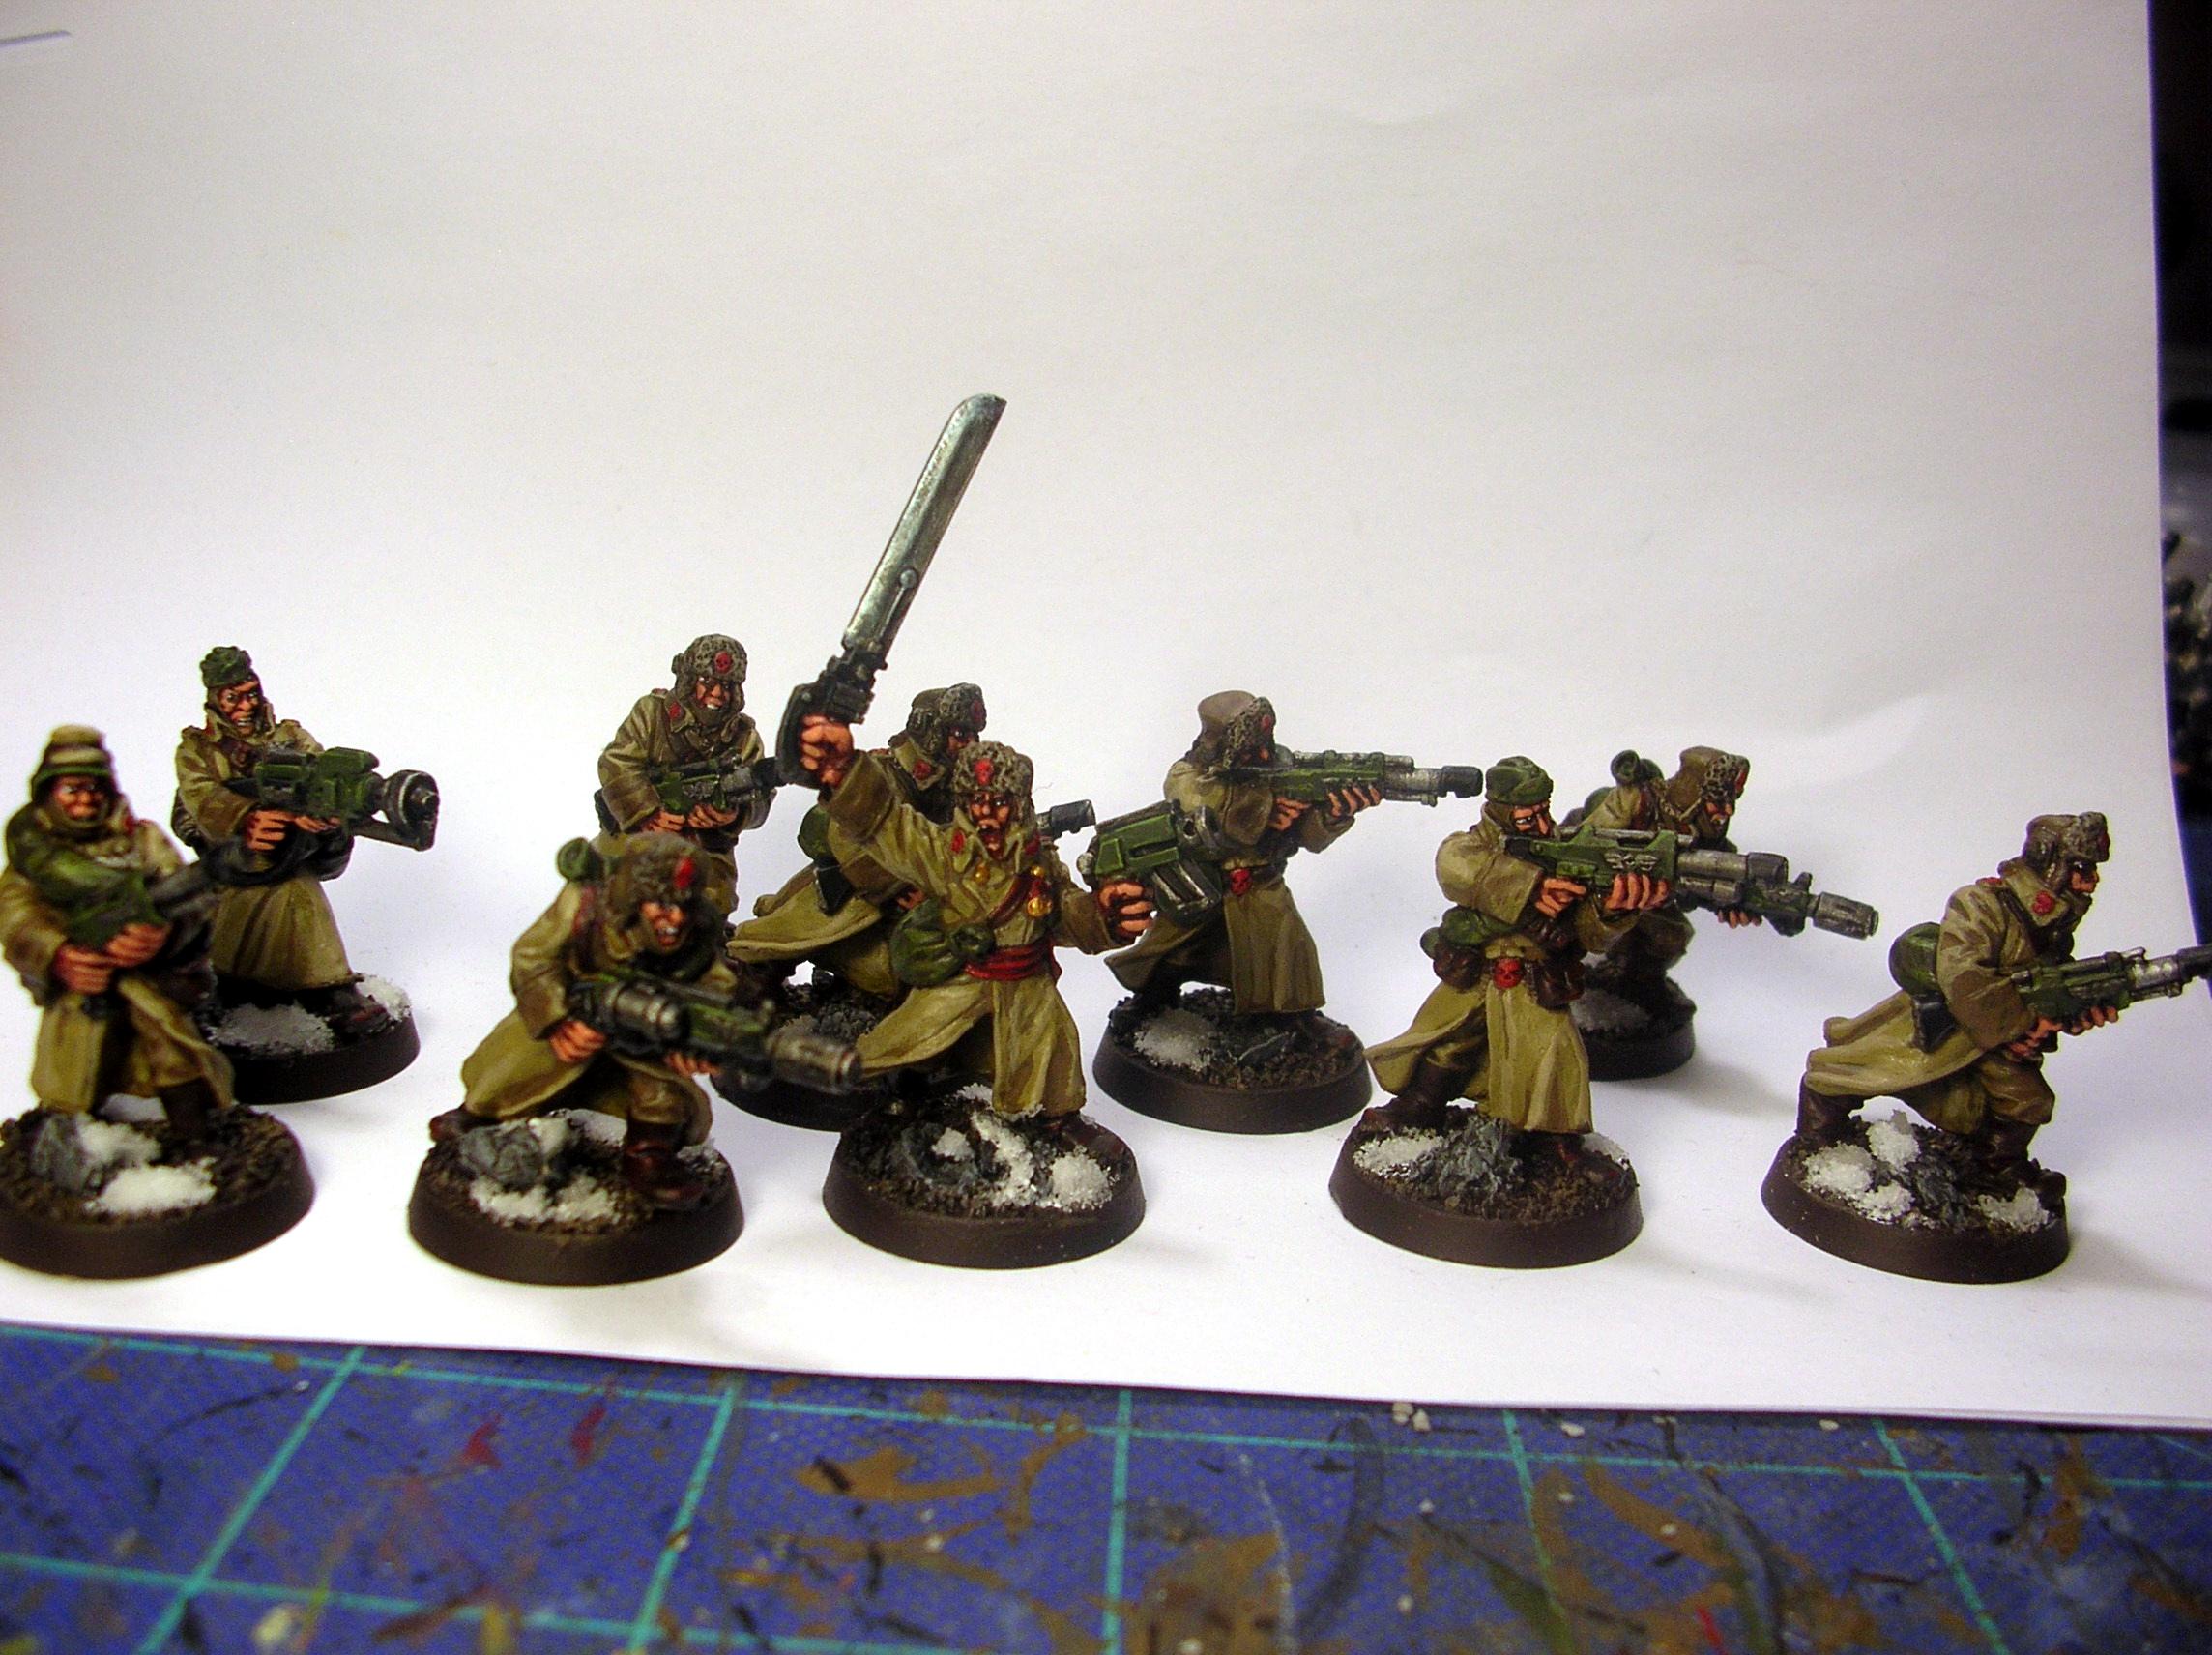 Imperial Guard, Russians, Snow, Valhallans, Warhammer 40,000